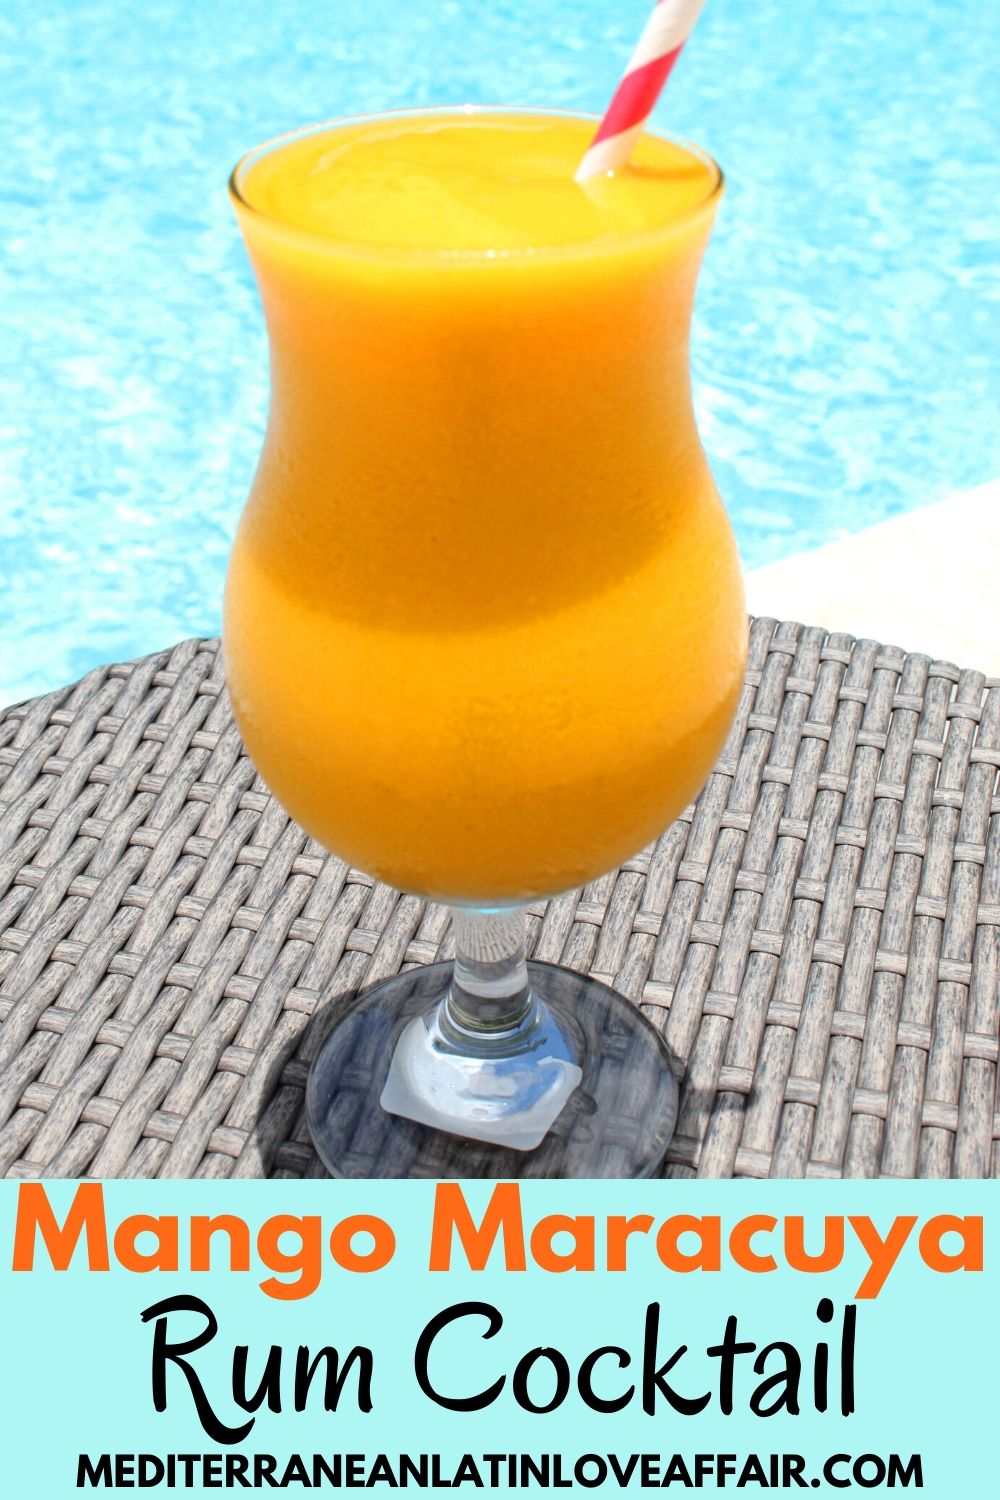 Mango Maracuya (Passion Fruit) Rum Cocktail - shown in a glass next to the pool.